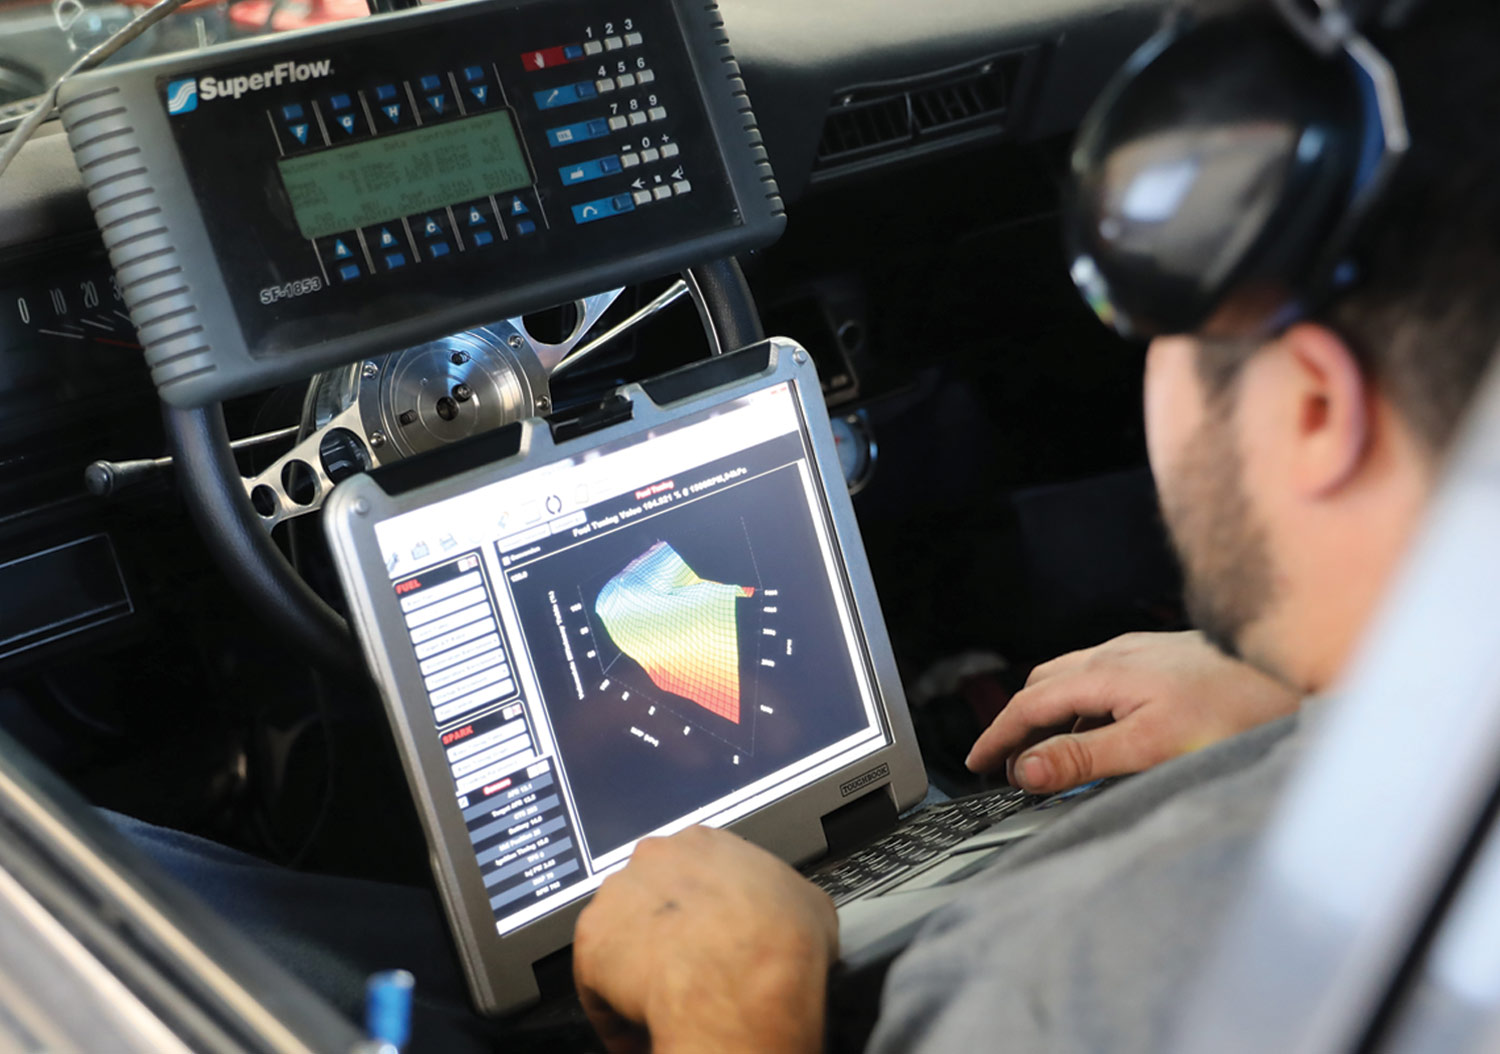 Westech’s Ishmael Candia sits in the driver seat of the Nova working with two a Superflow moniter and a laptop